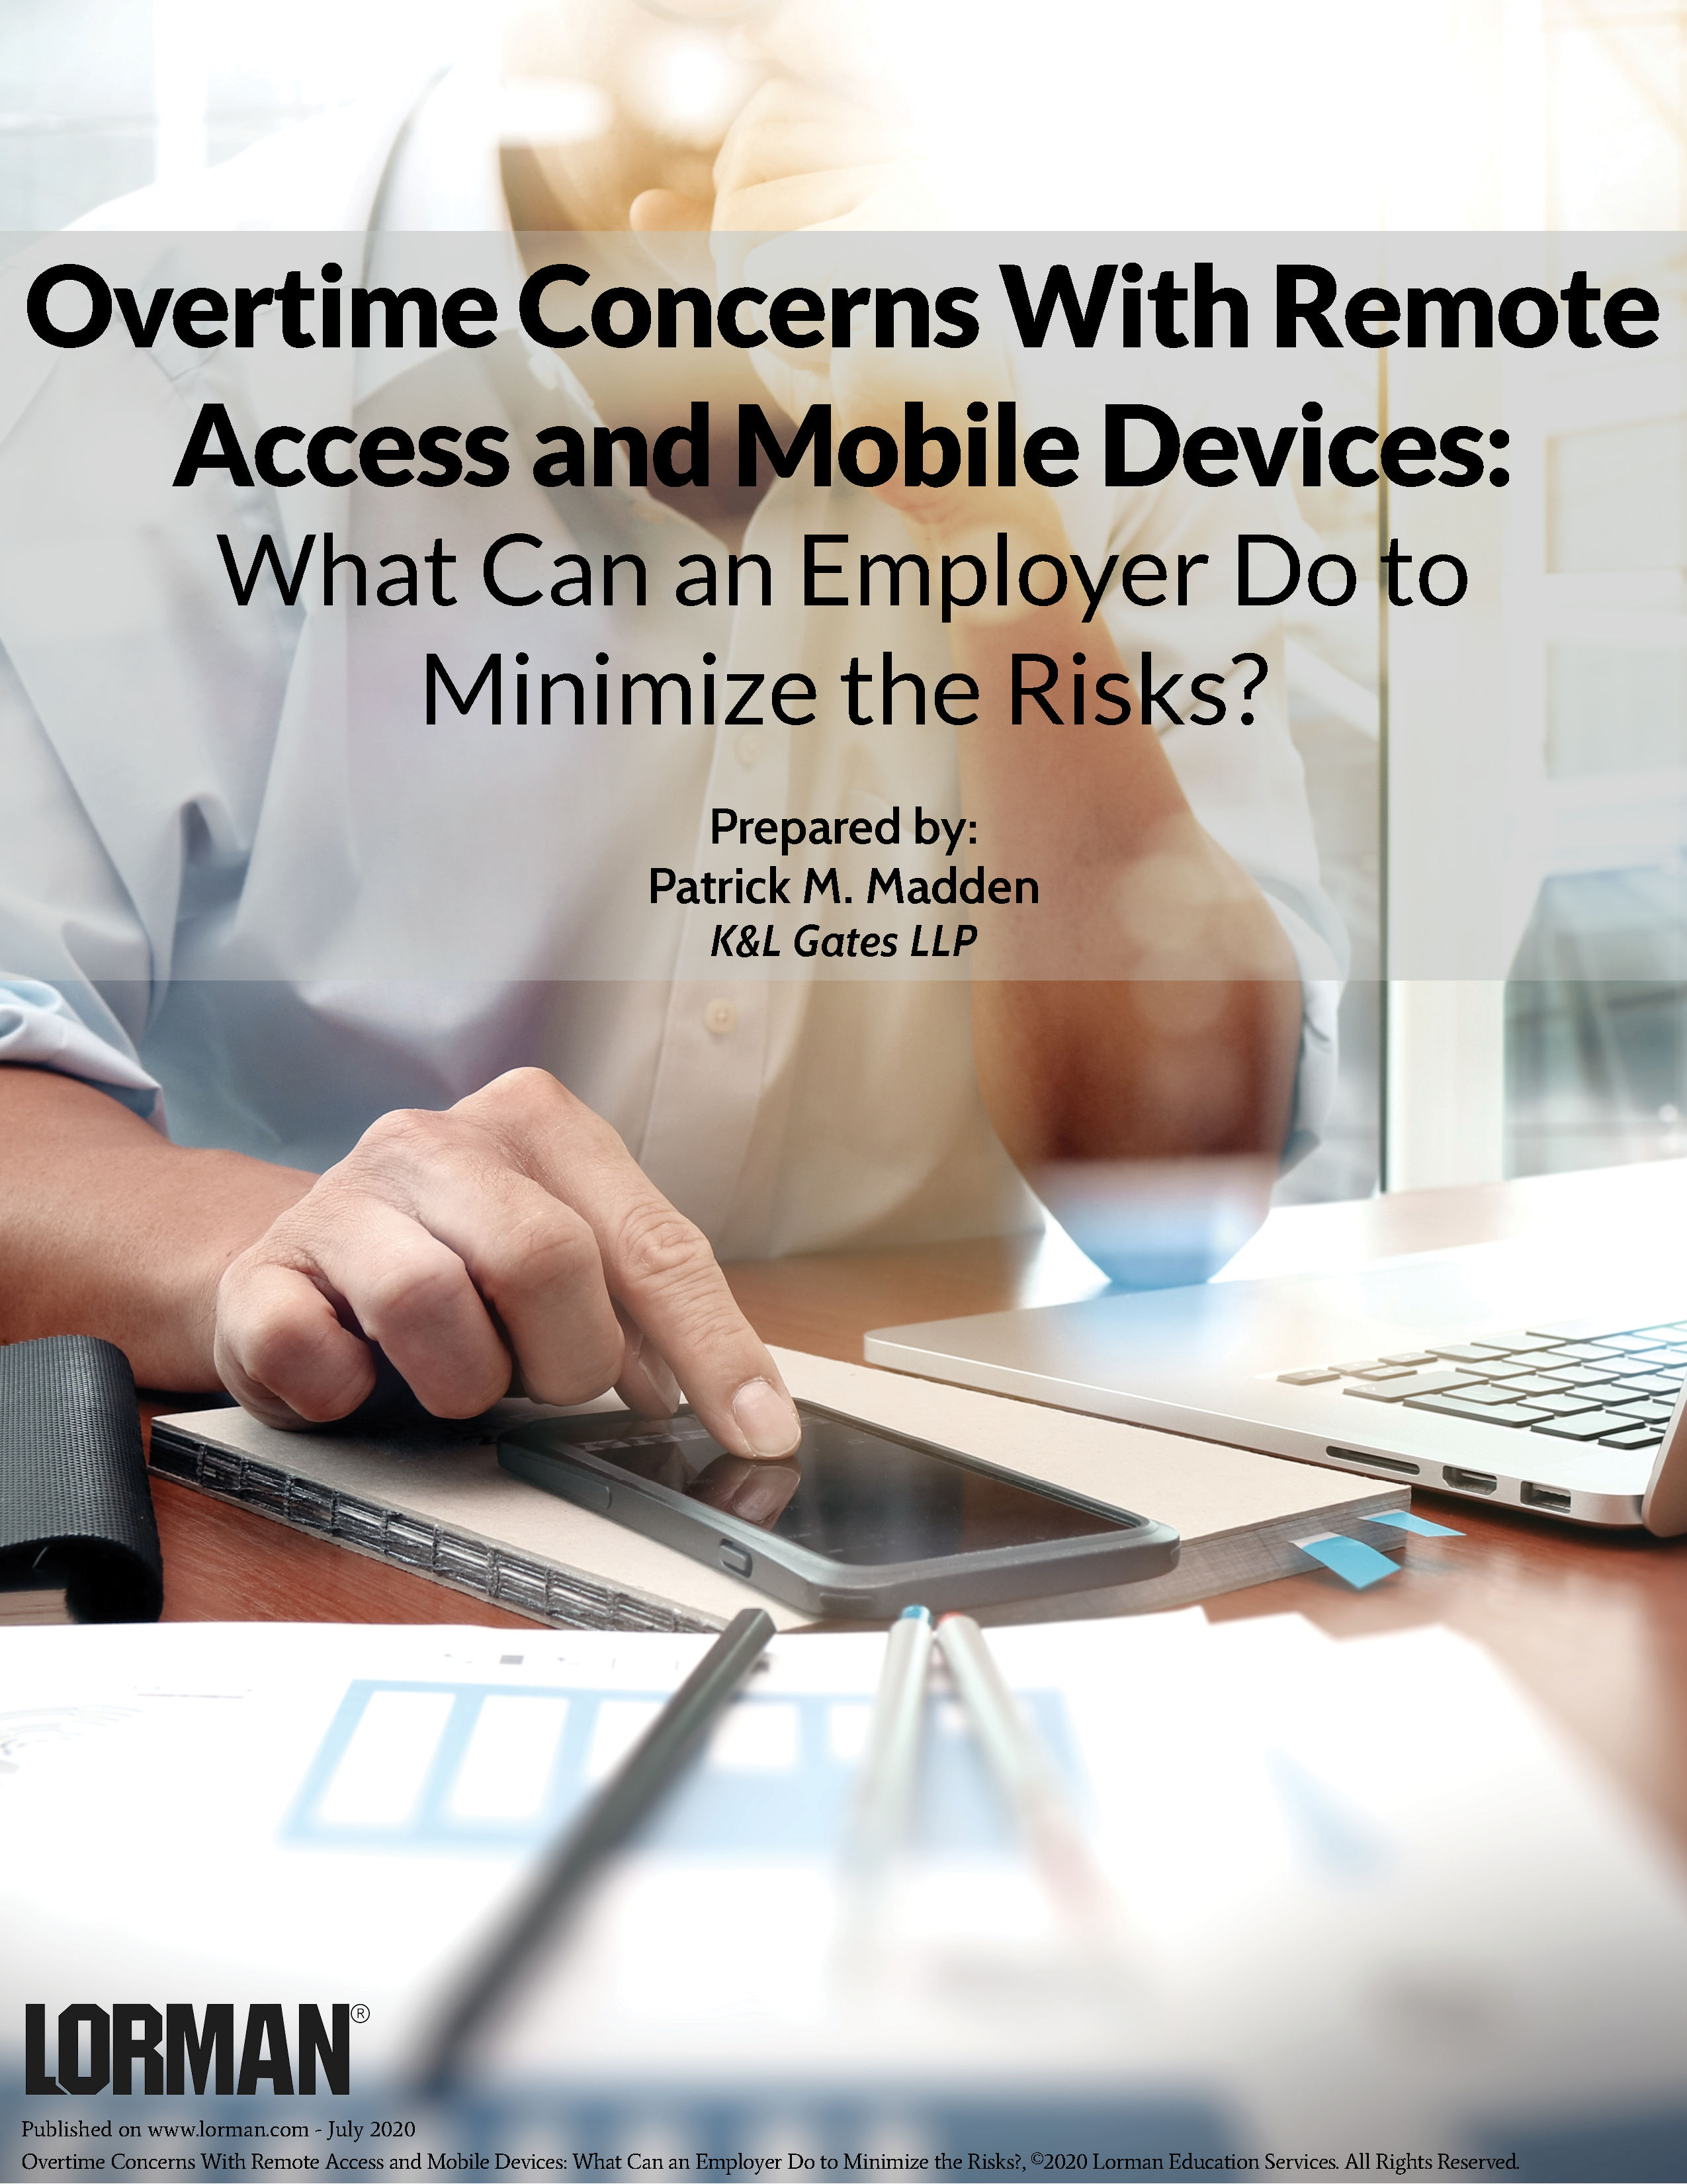 Overtime Concerns With Remote Access and Mobile Devices